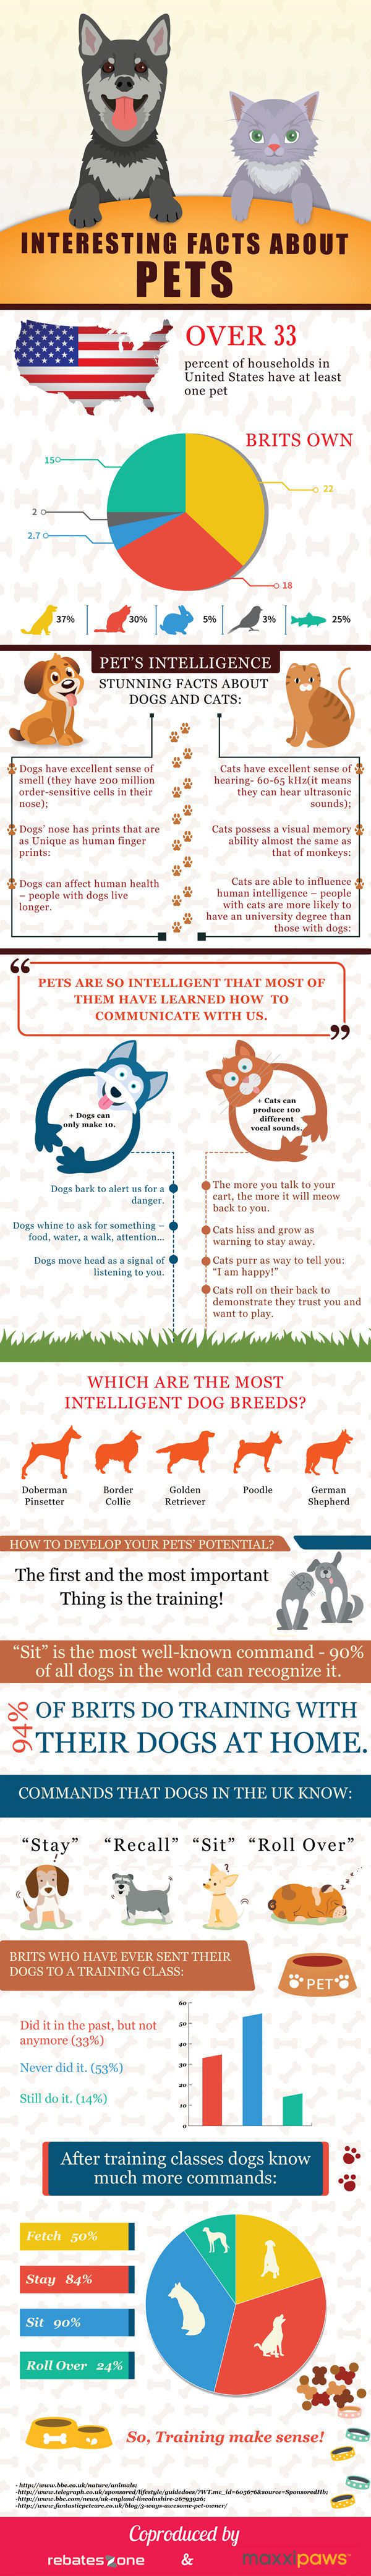 Interesting facts about pets from maxxipaws